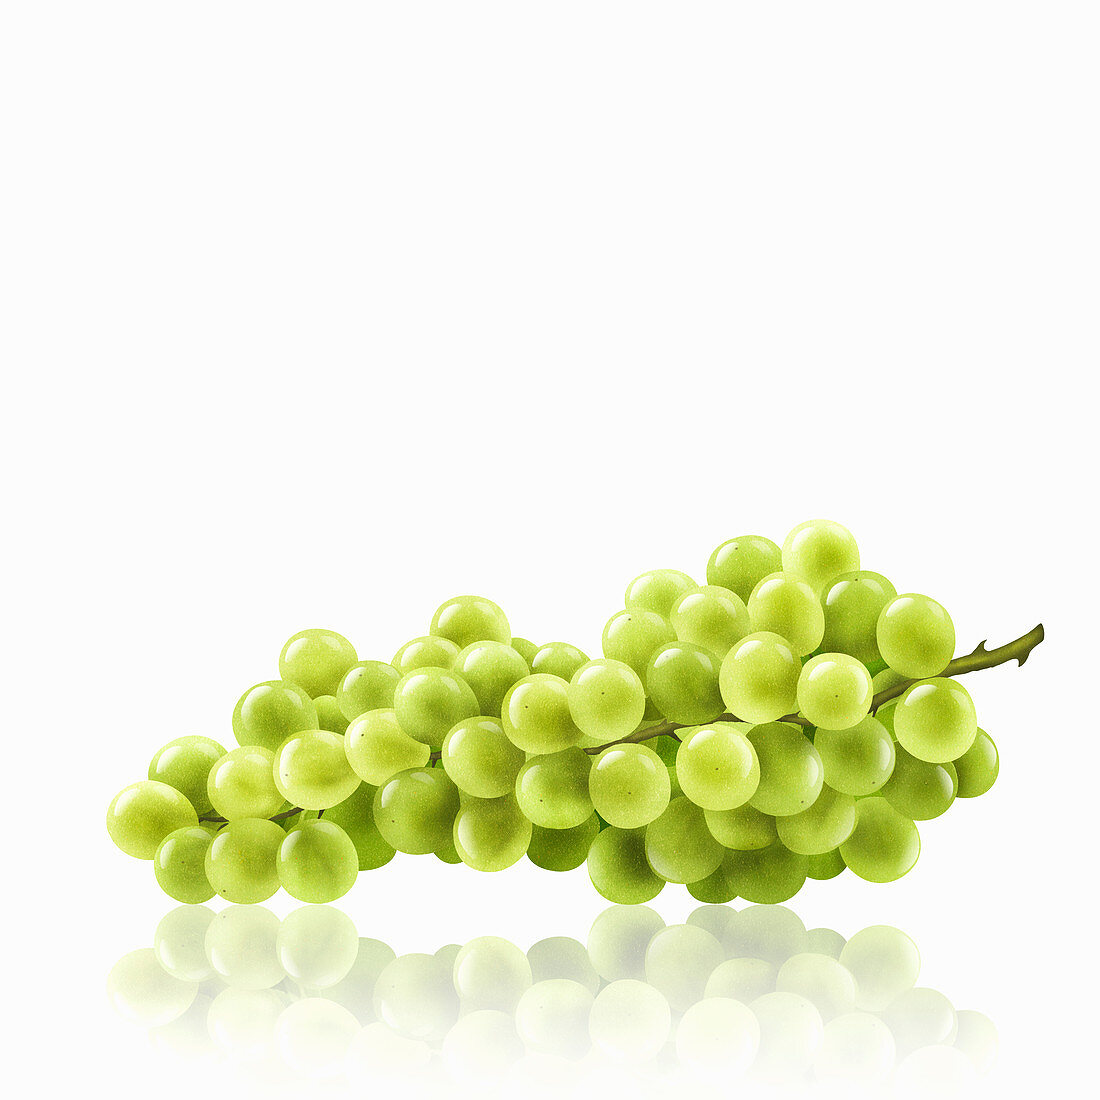 Bunch of white grapes, illustration